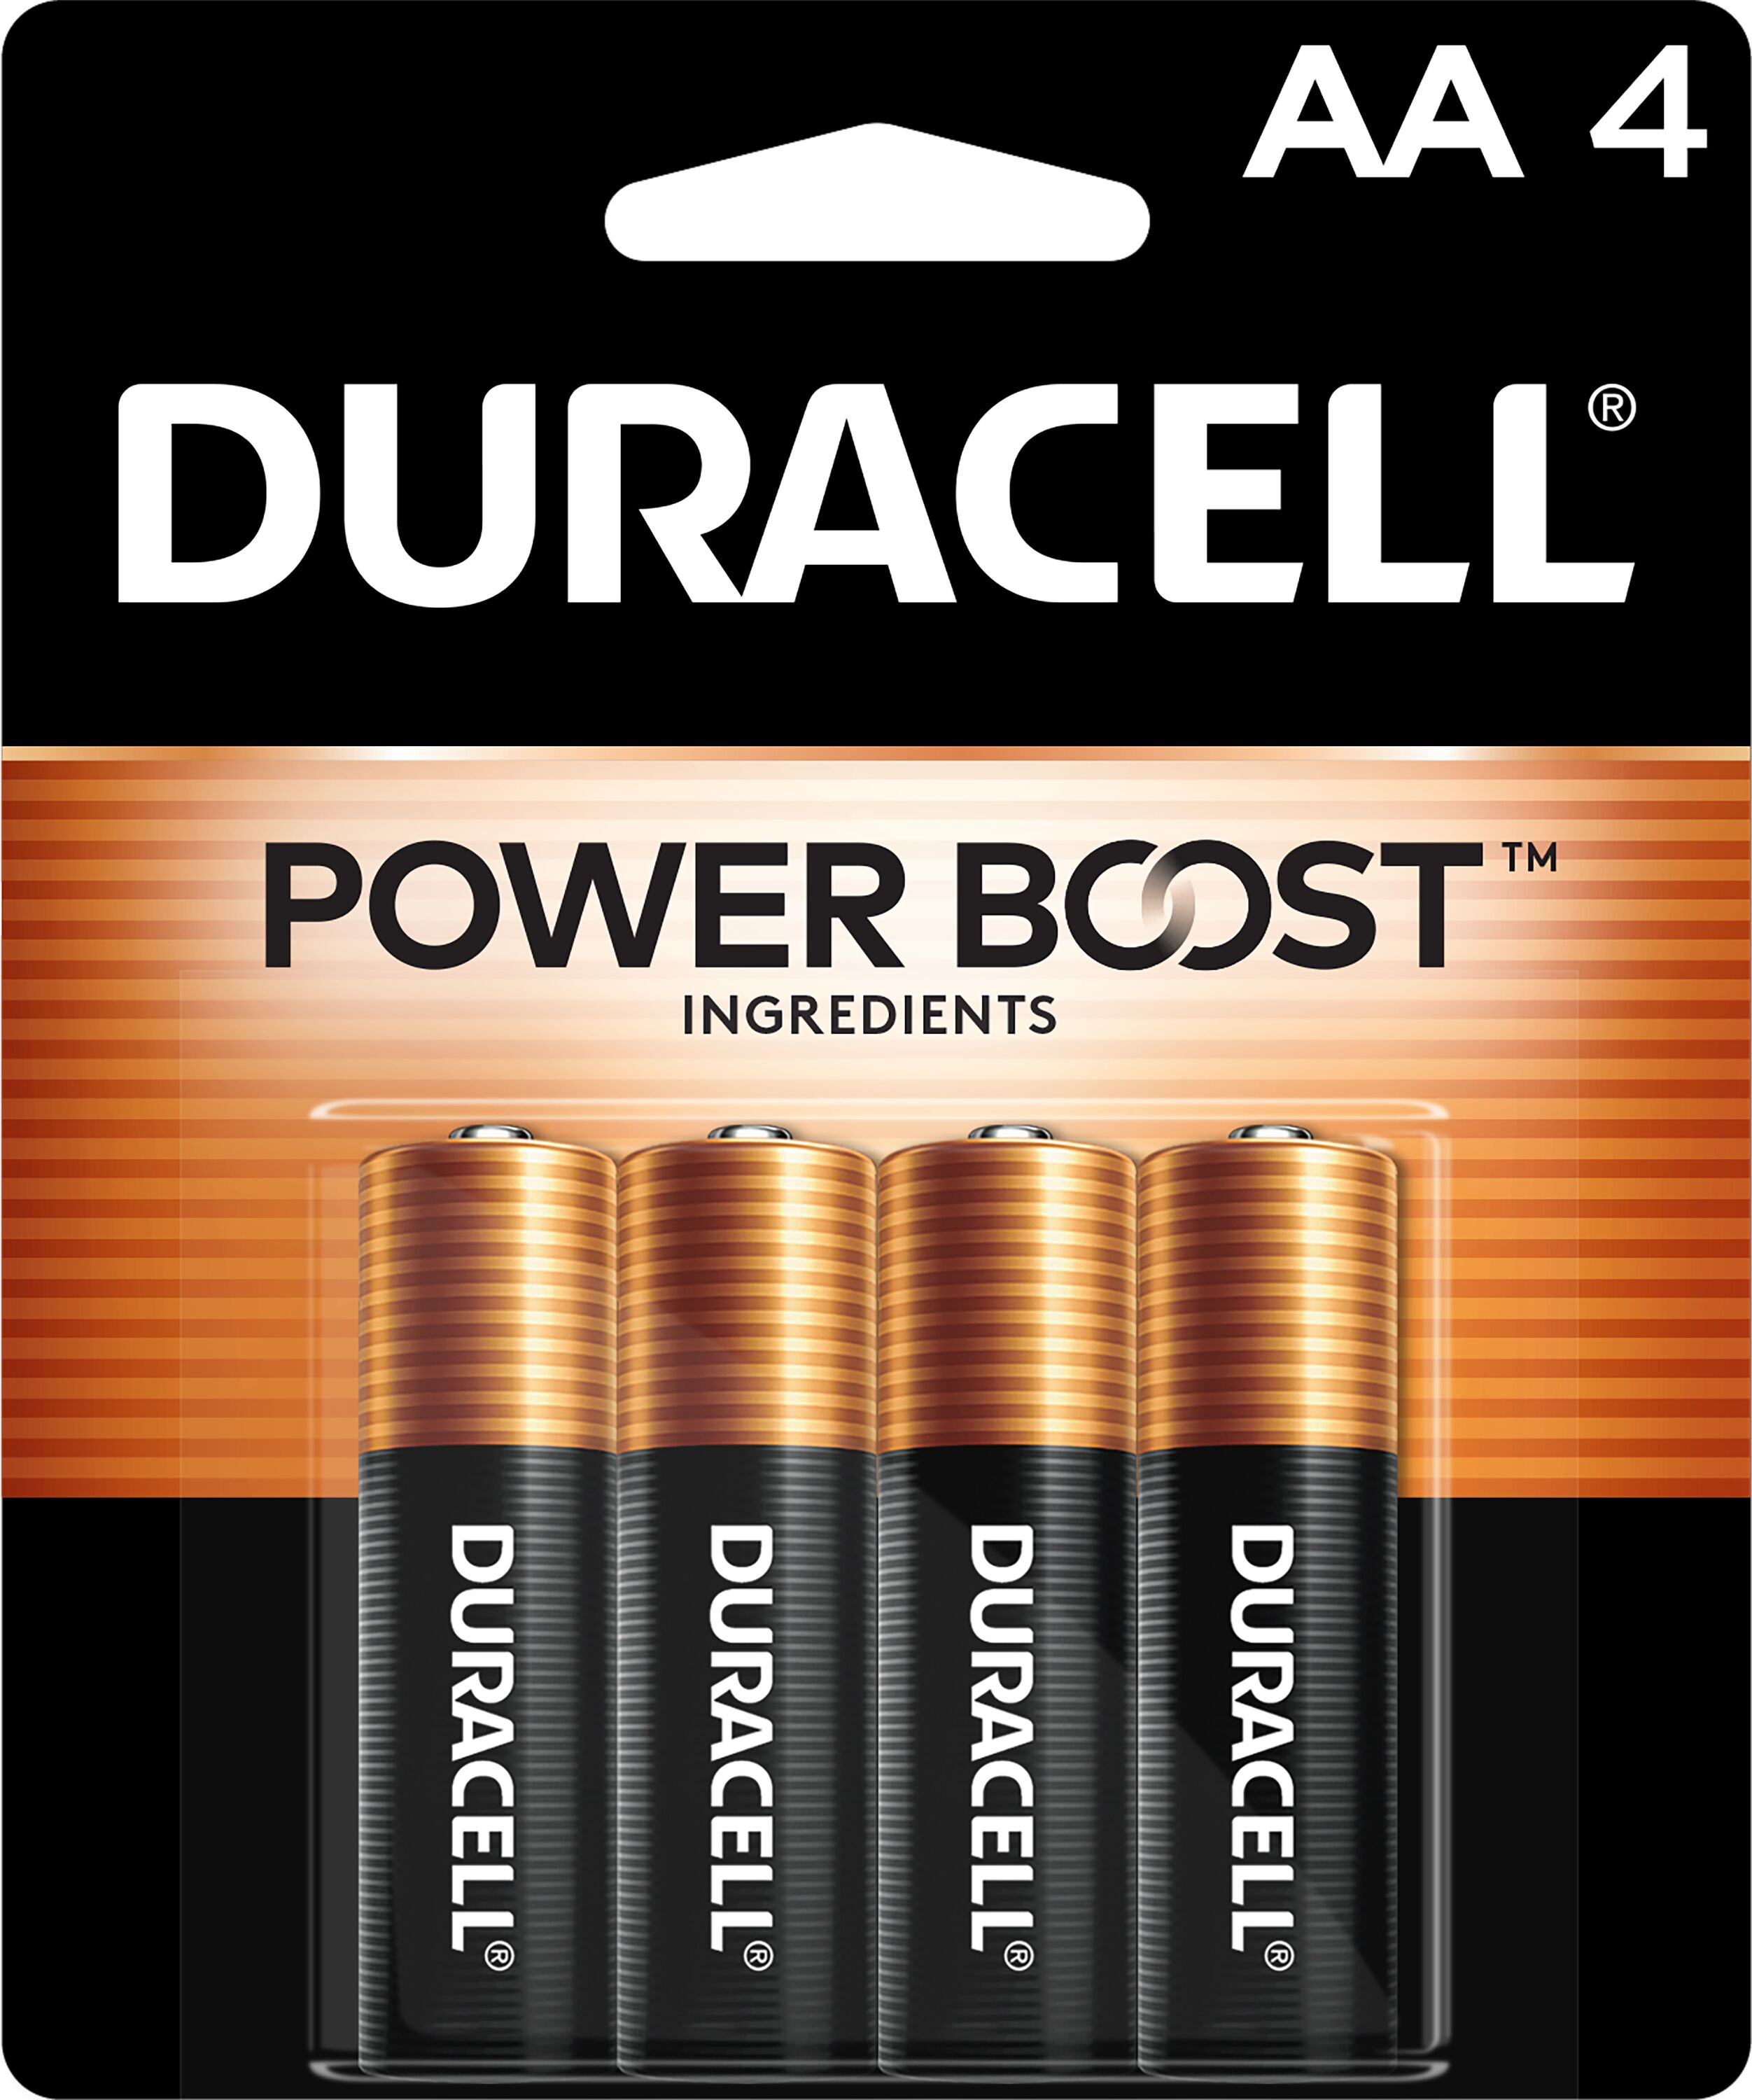 Duracell 1.5V Coppertop Alkaline AA Batteries, 4 Pack - image 1 of 9